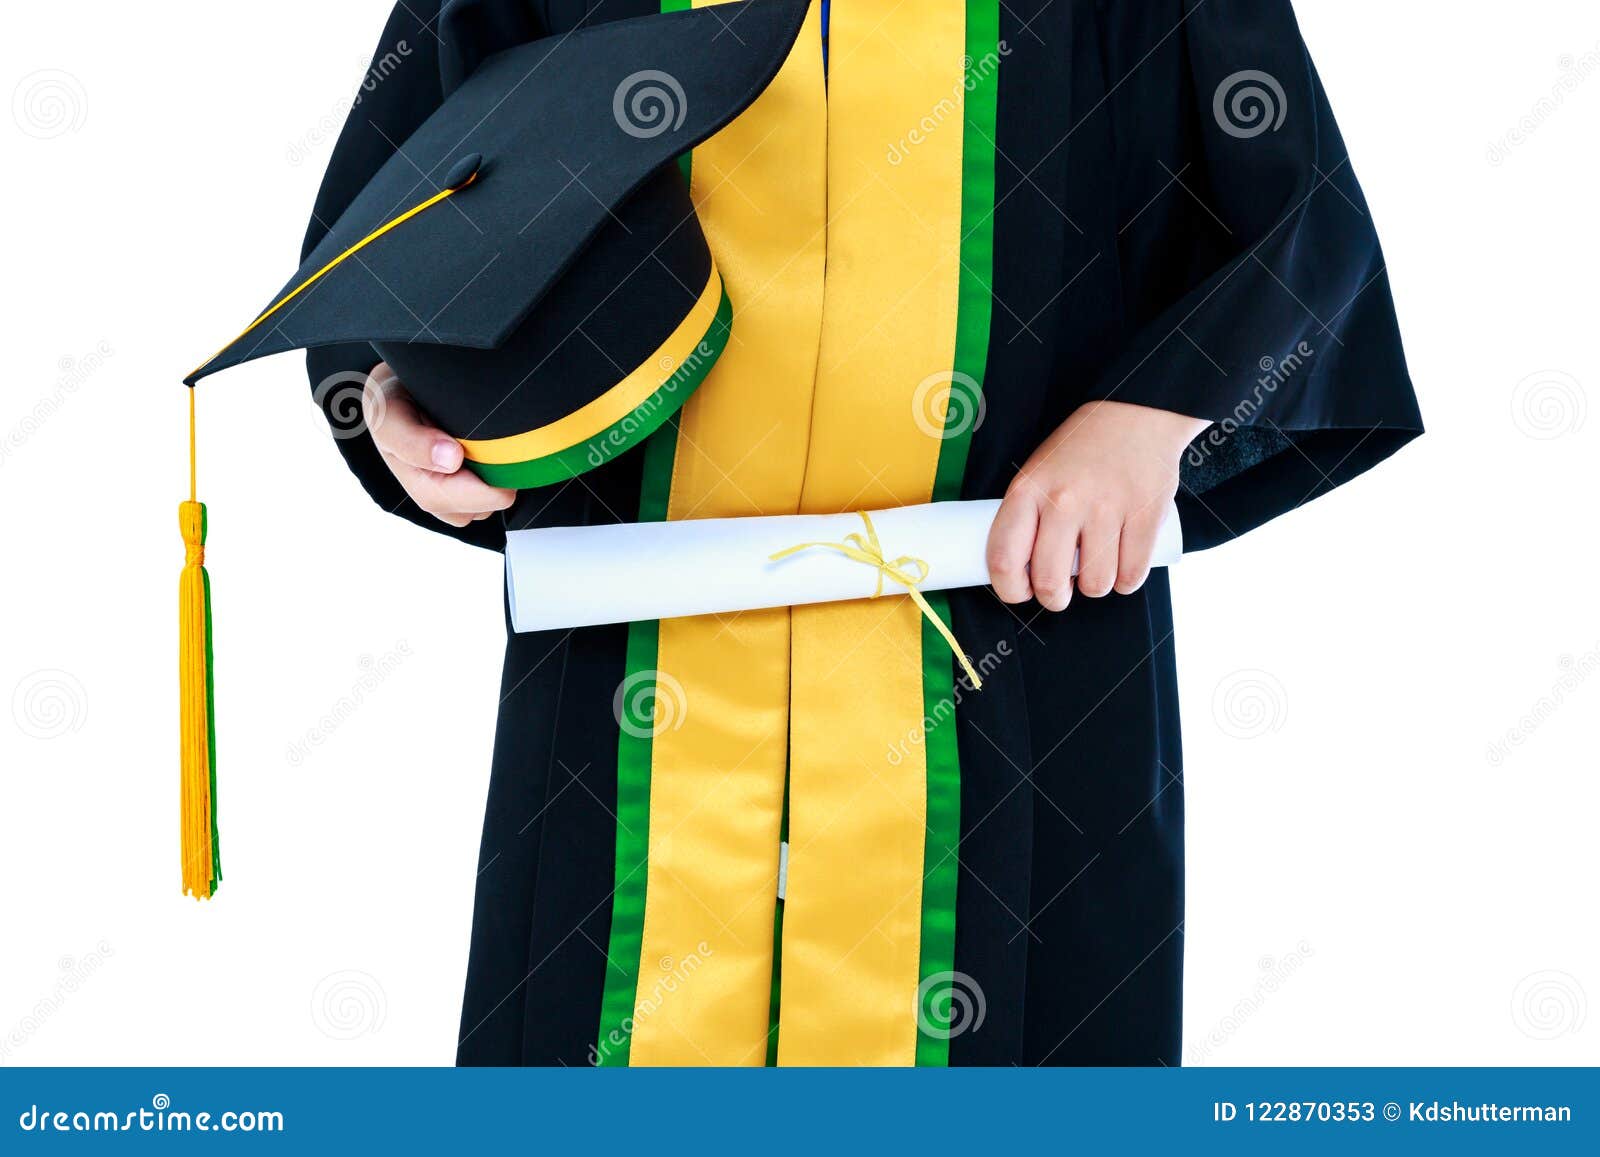 Can I wear 'graduation gowns' after completing a master's degree? - Quora